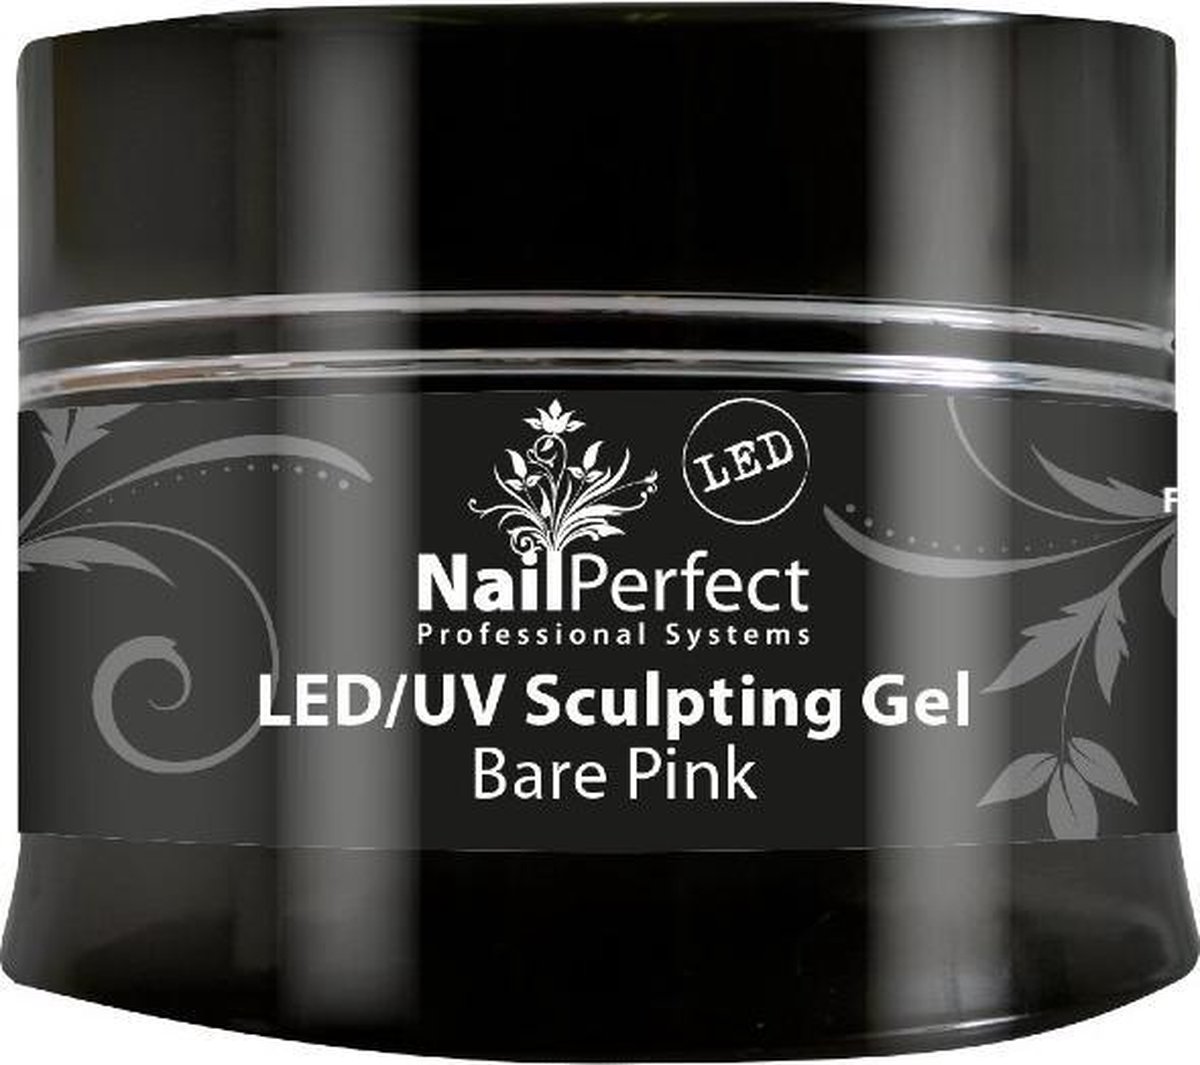 Nail Perfect LED/UV Sculpting Gel Bare Pink 14gr